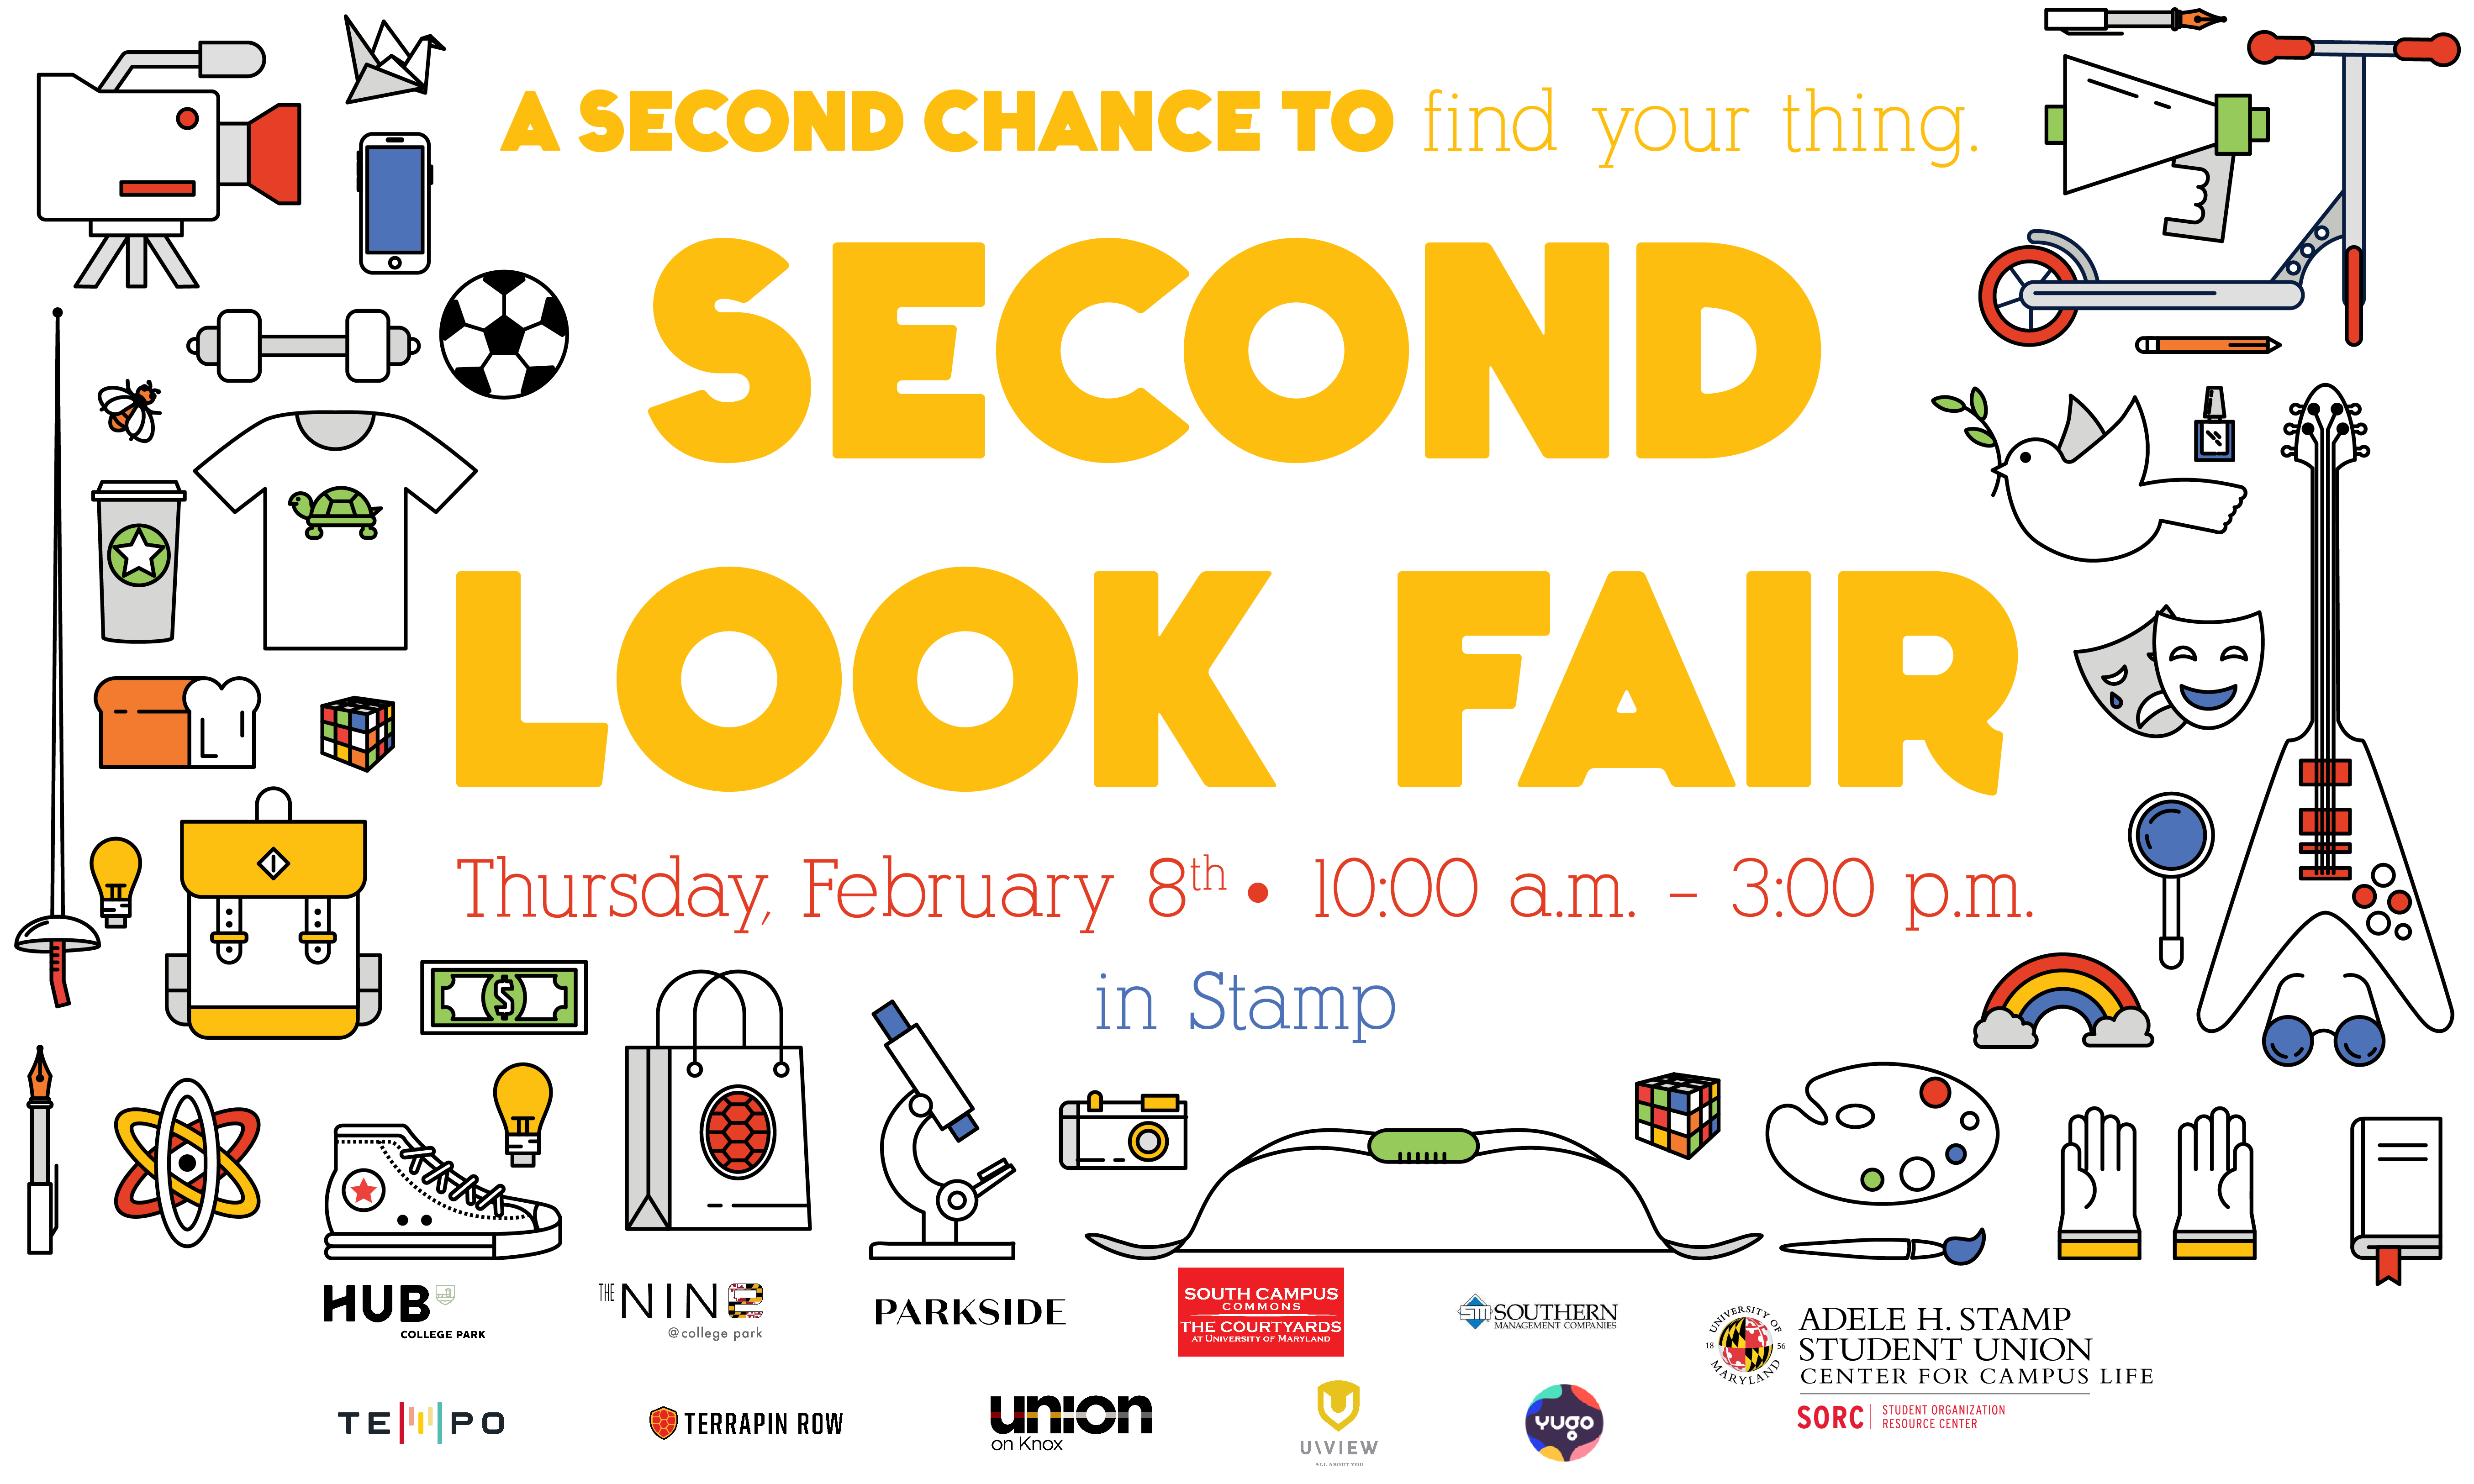 Second Look Fair general advertisement - Second Look Fair, Thursday, February 8 from 10:00am to 3:00pm in the STAMP Student Union